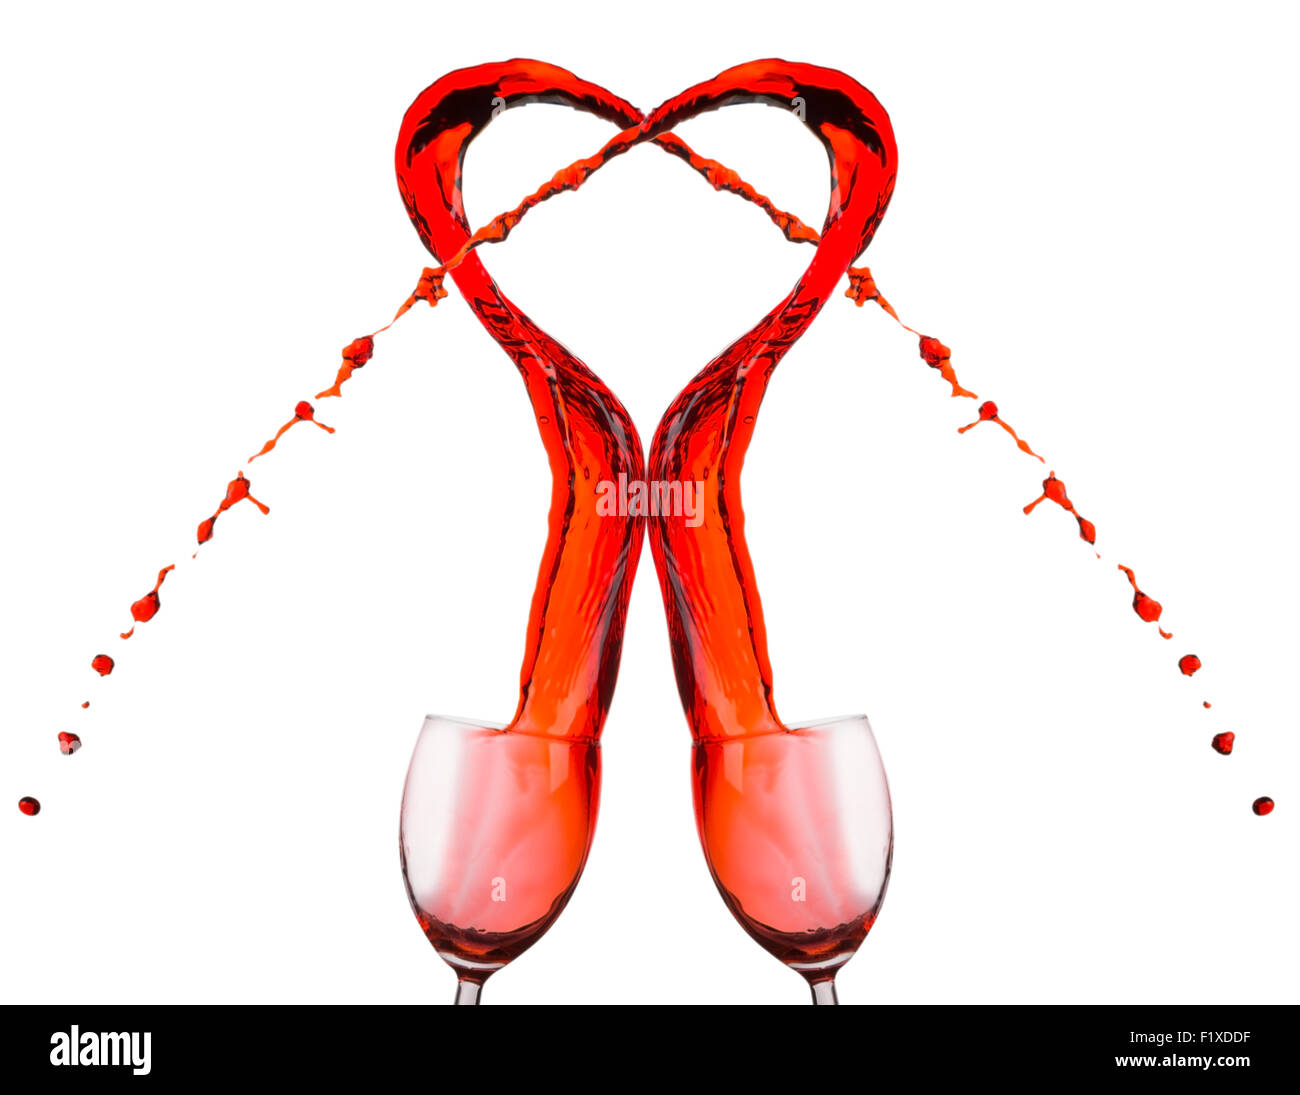 Red wine spilling and forming heart shape. Stock Photo